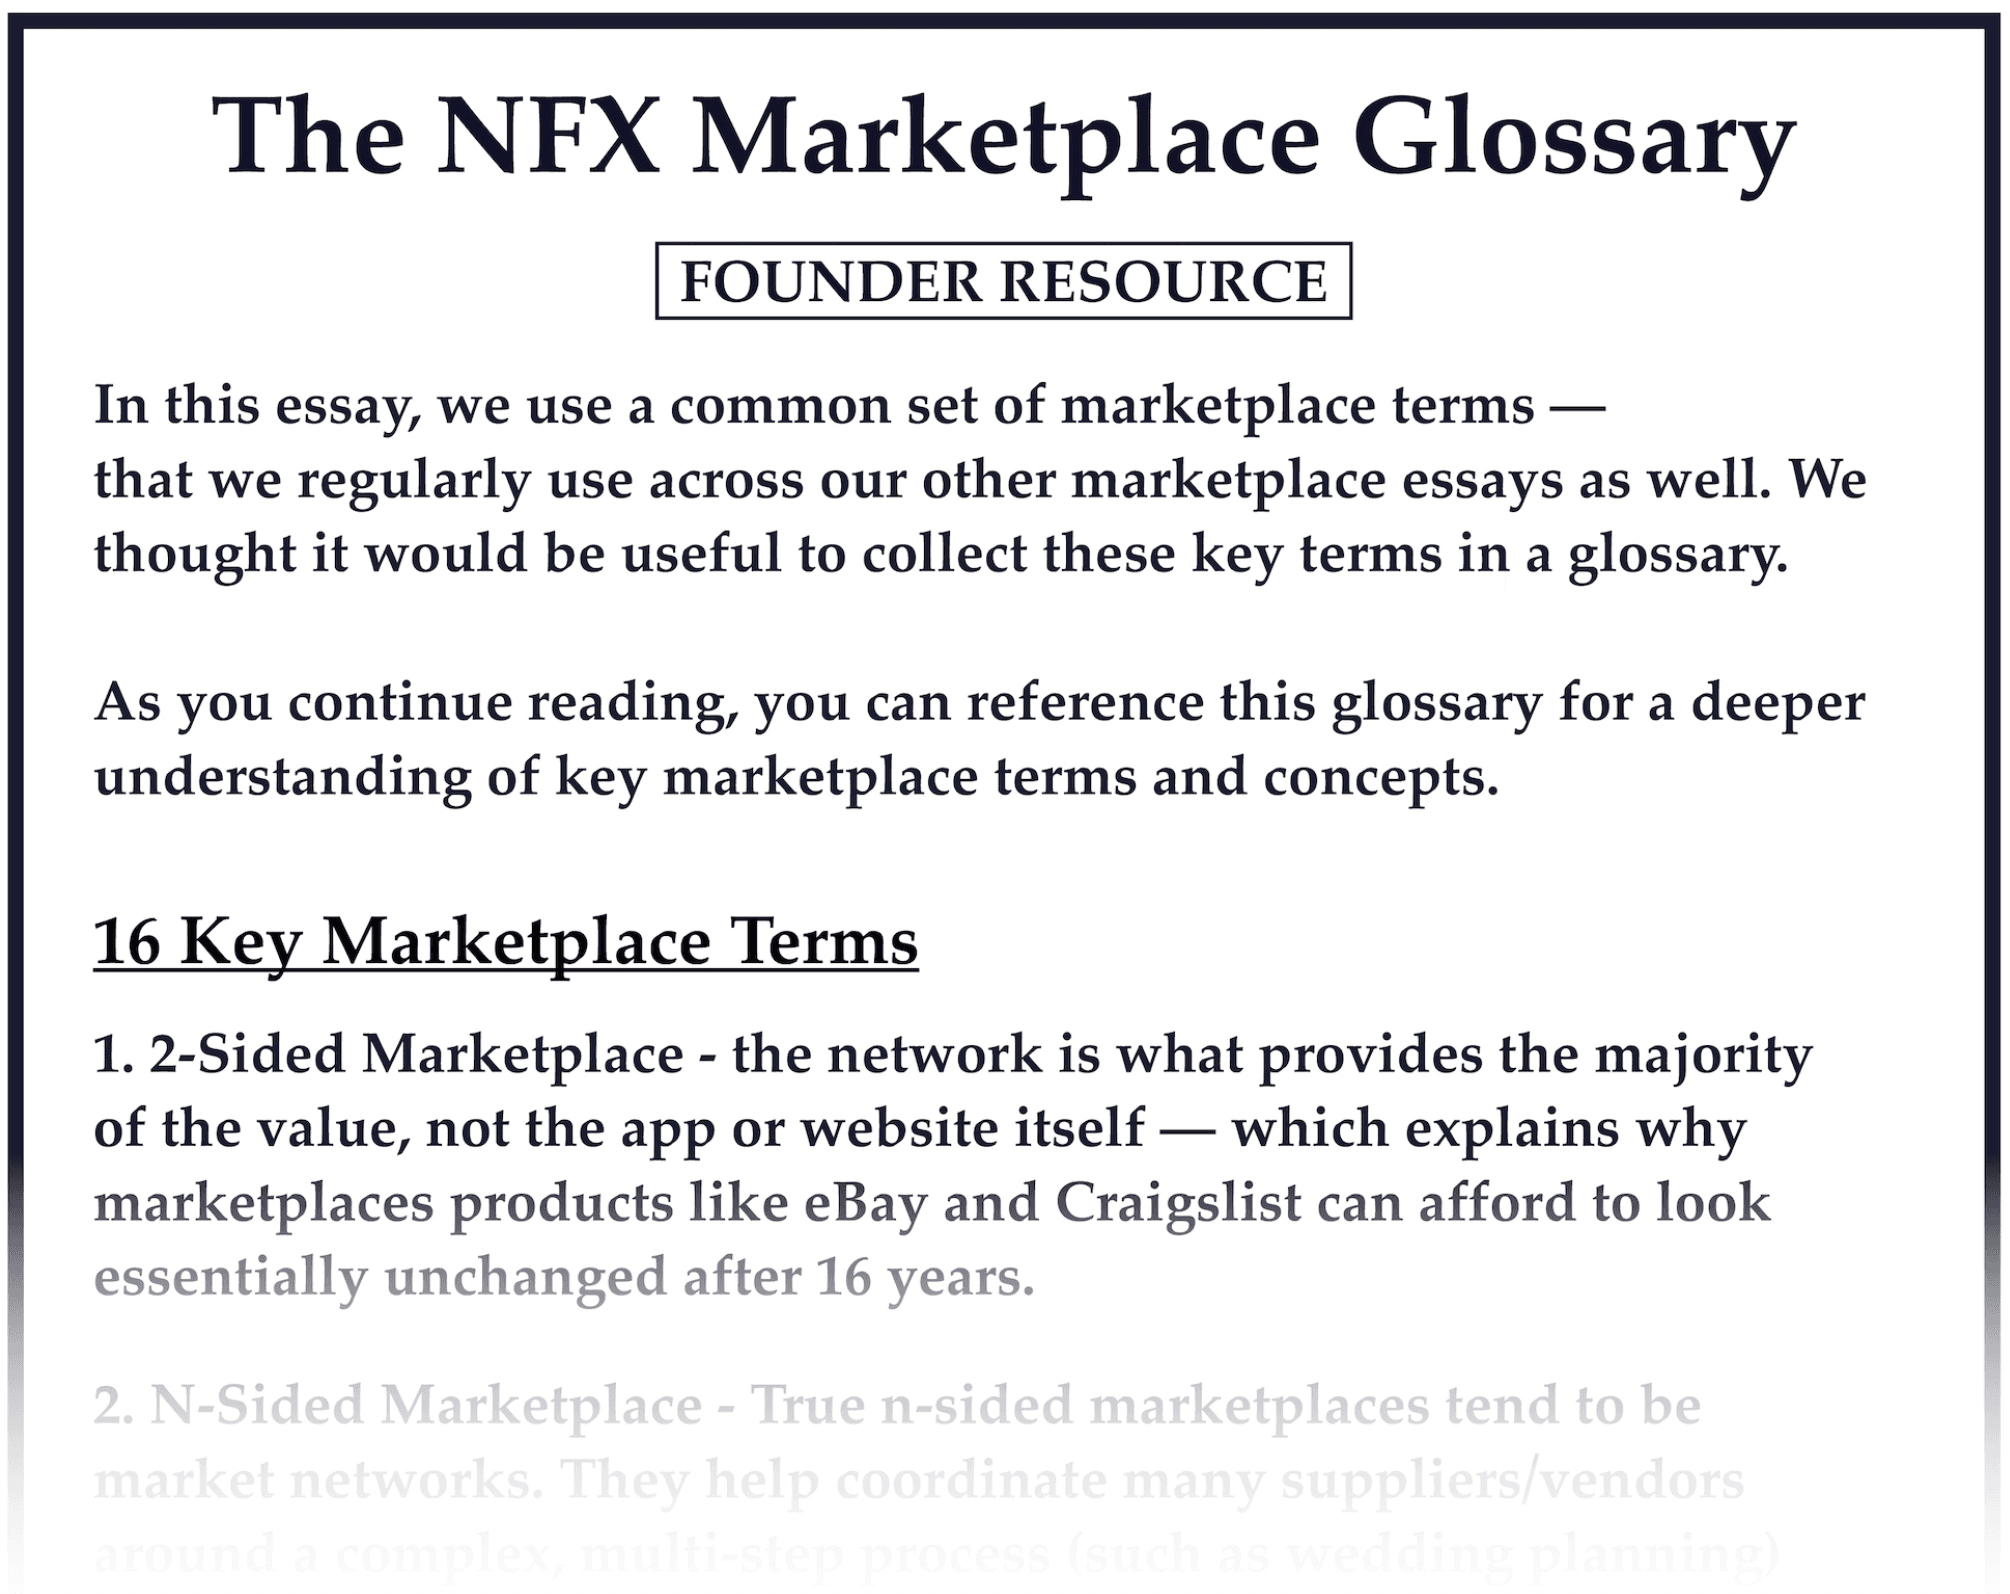 The NFX Marketplace Glossary -- Founder Resource